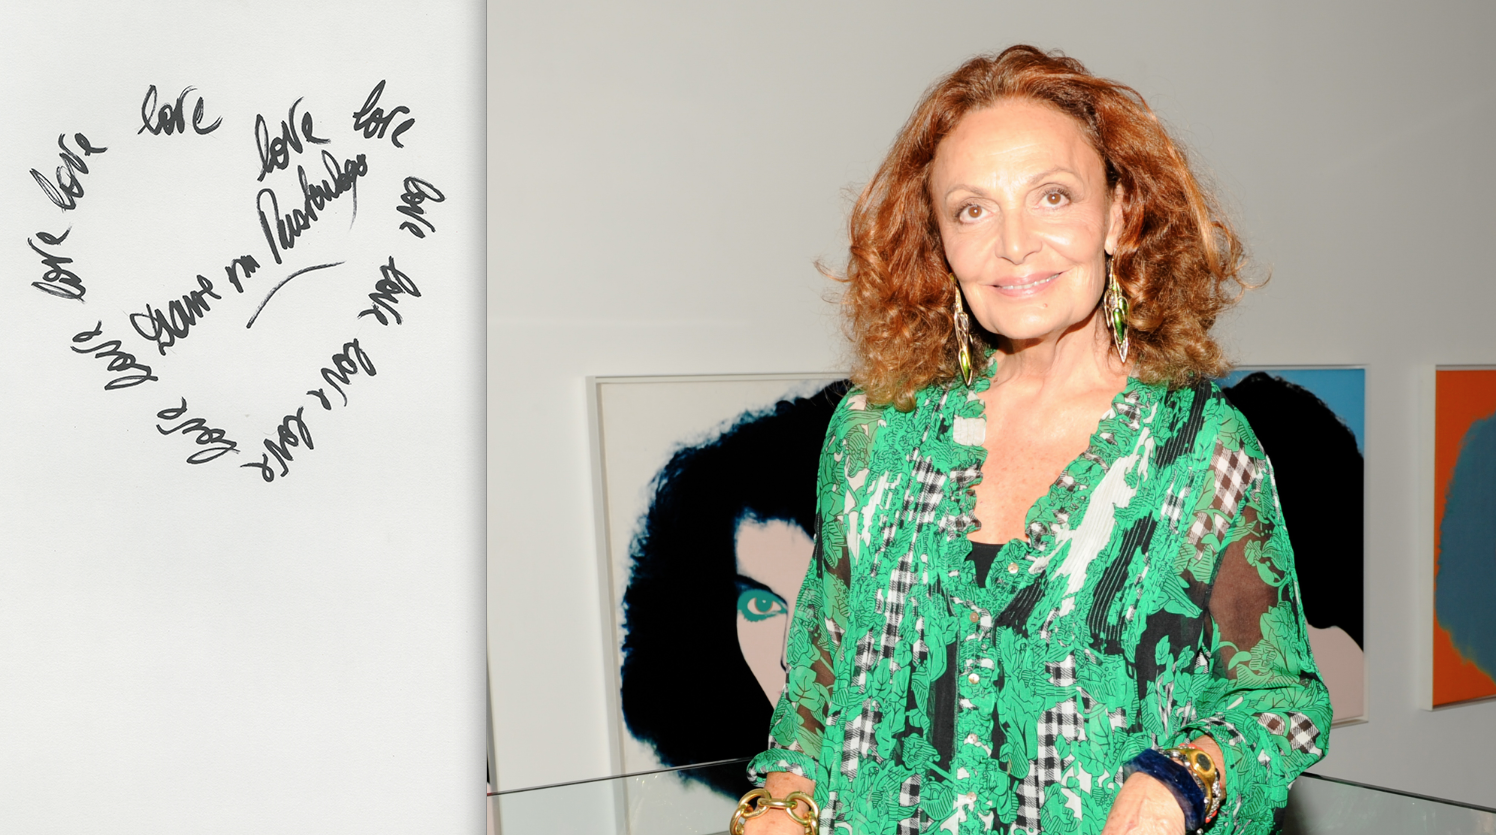 DvF, Julianne Moore, and Naomi Watts Draw The Line